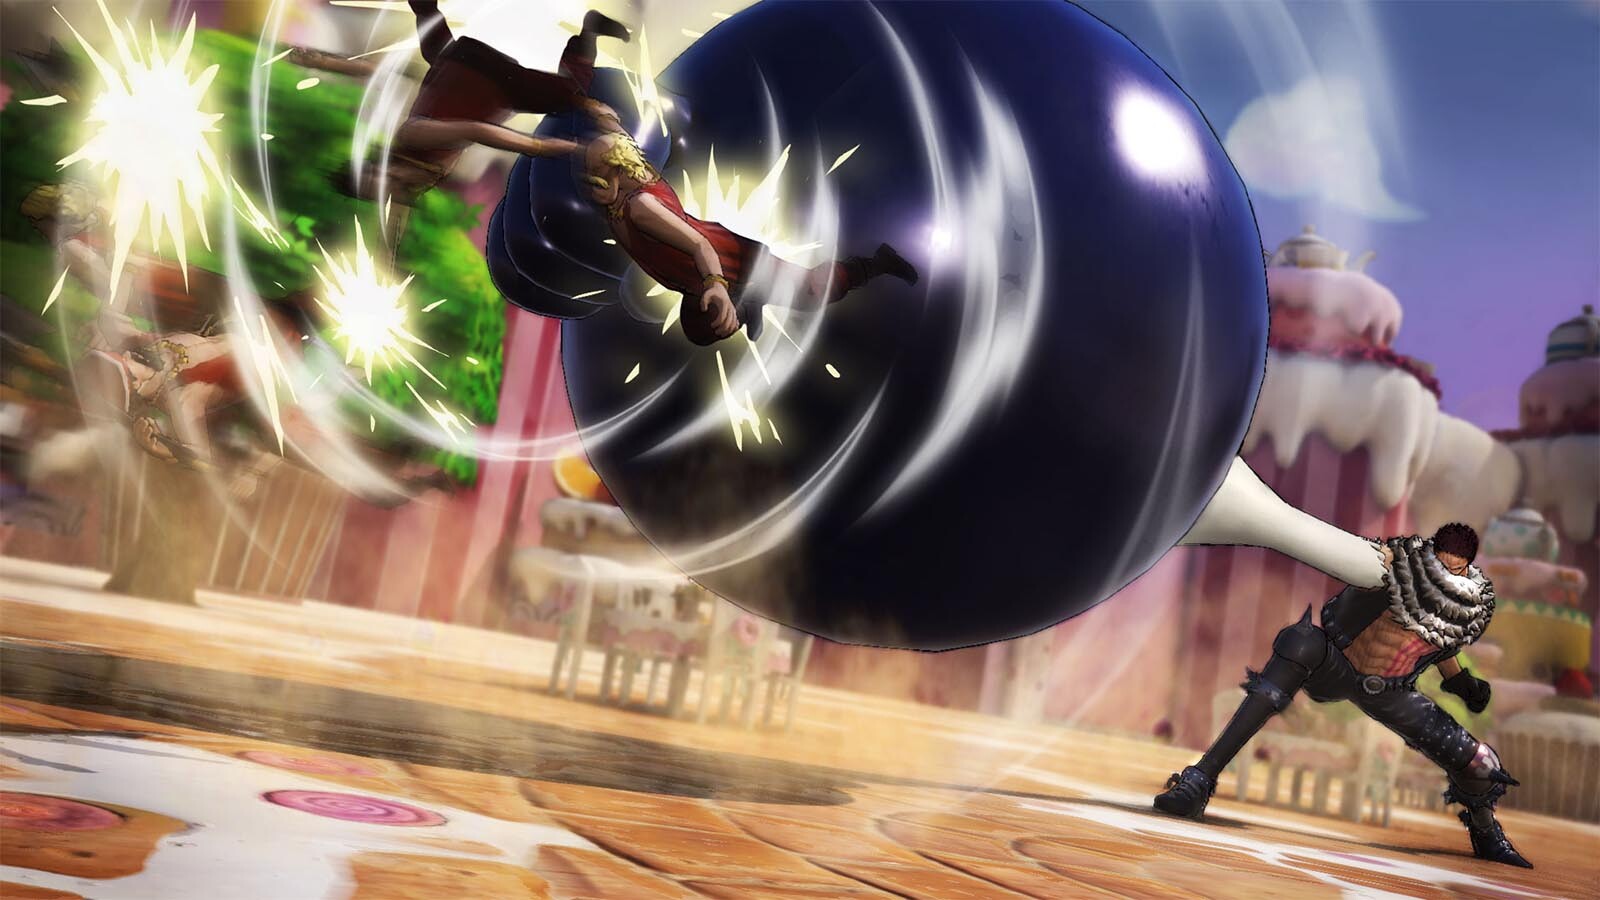 One Piece Pirate Warriors 4 - Character Pass 2 Steam Key for PC - Buy now